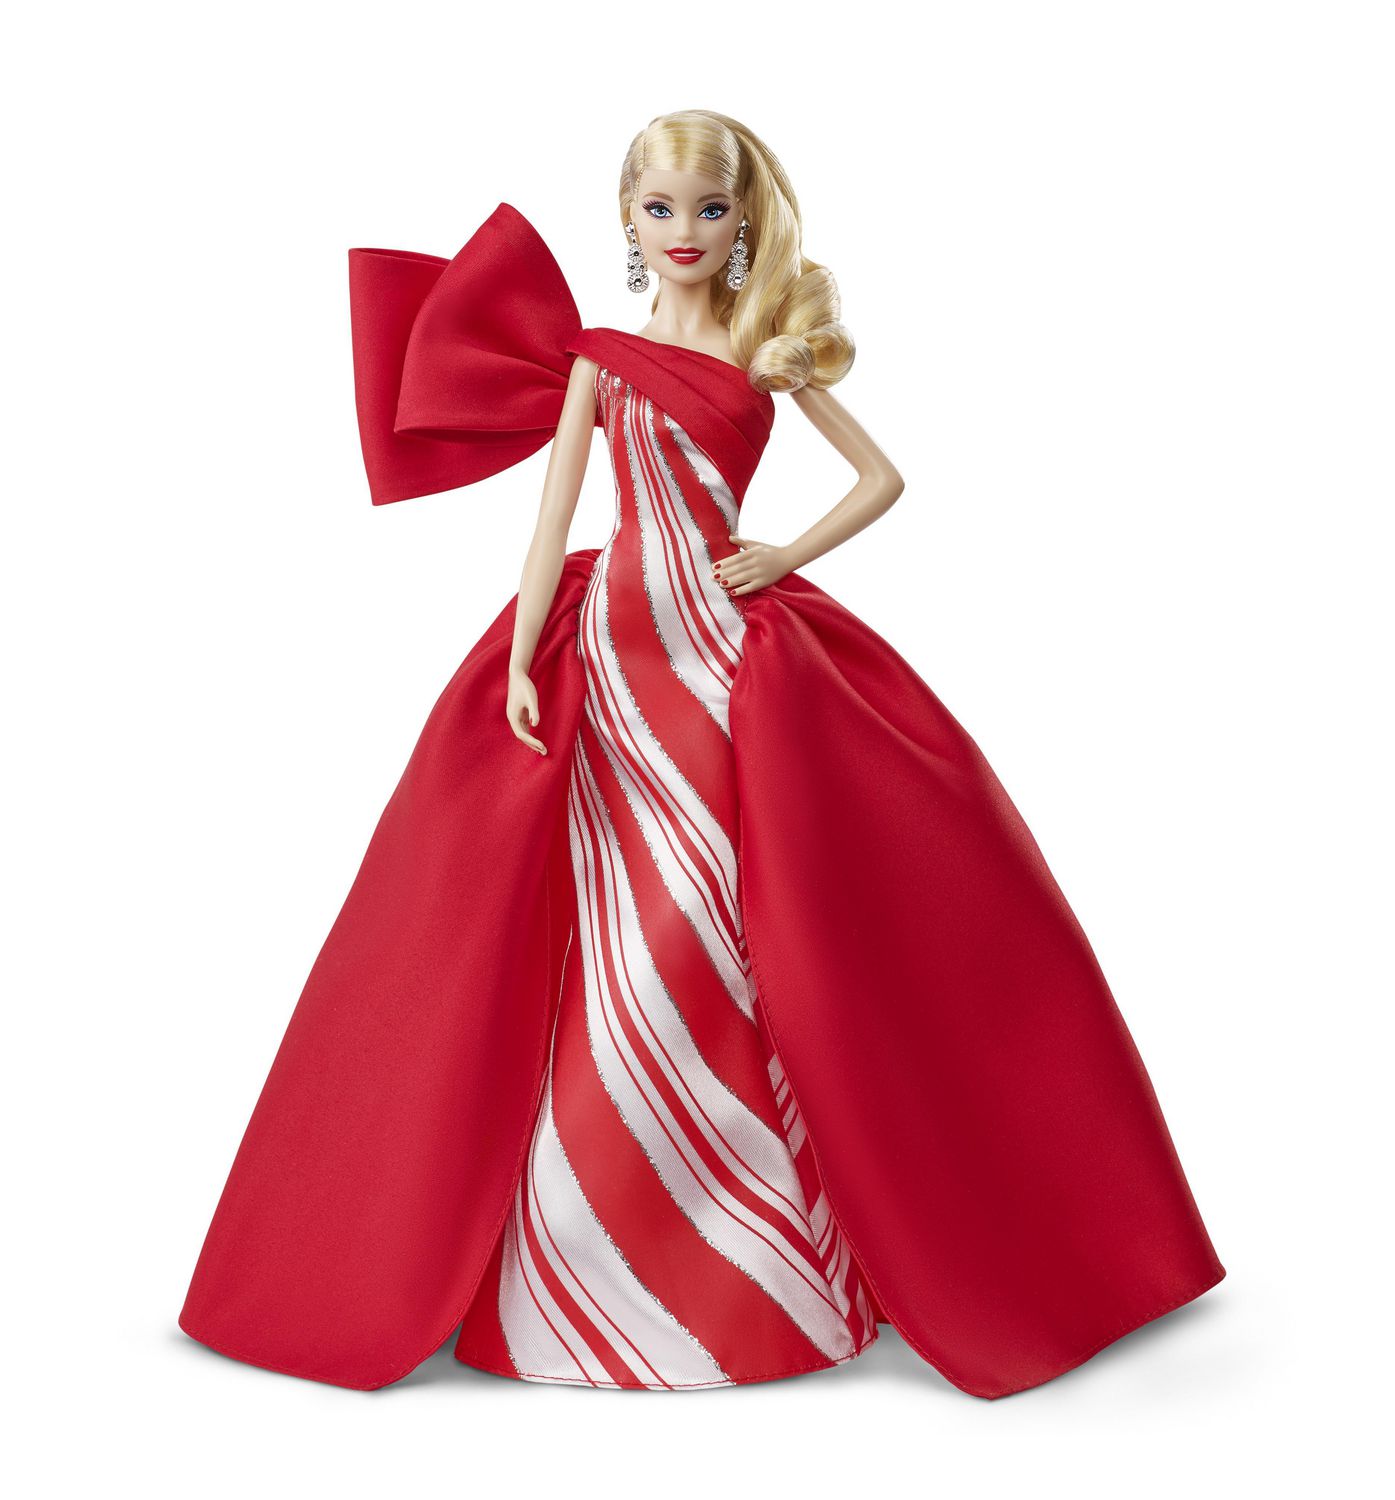 how much is the first holiday barbie worth